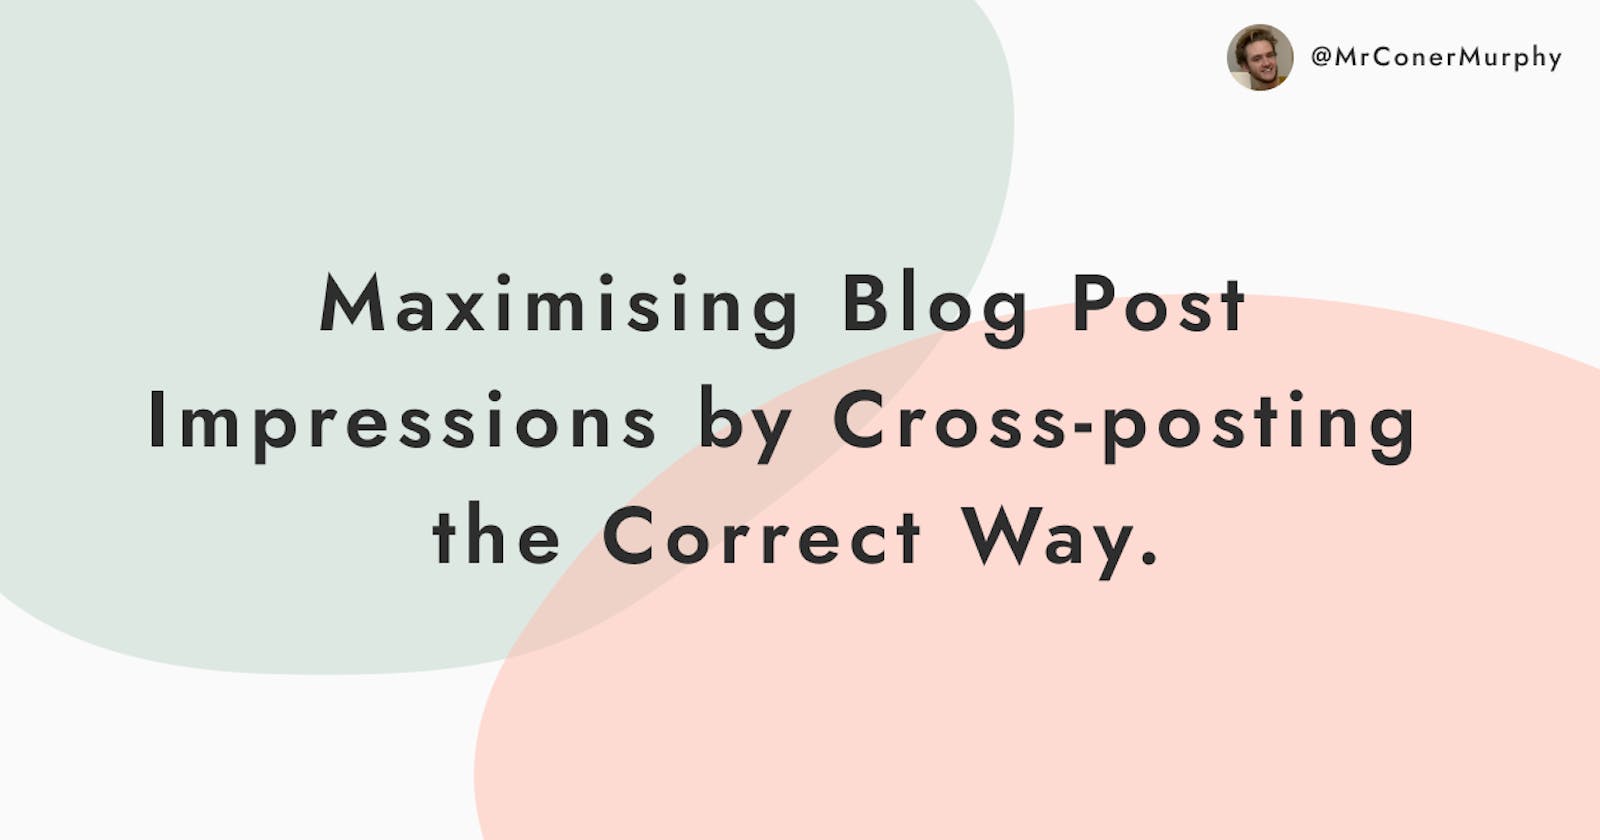 Maximising Blog Post Impressions by Cross-posting the Correct Way.